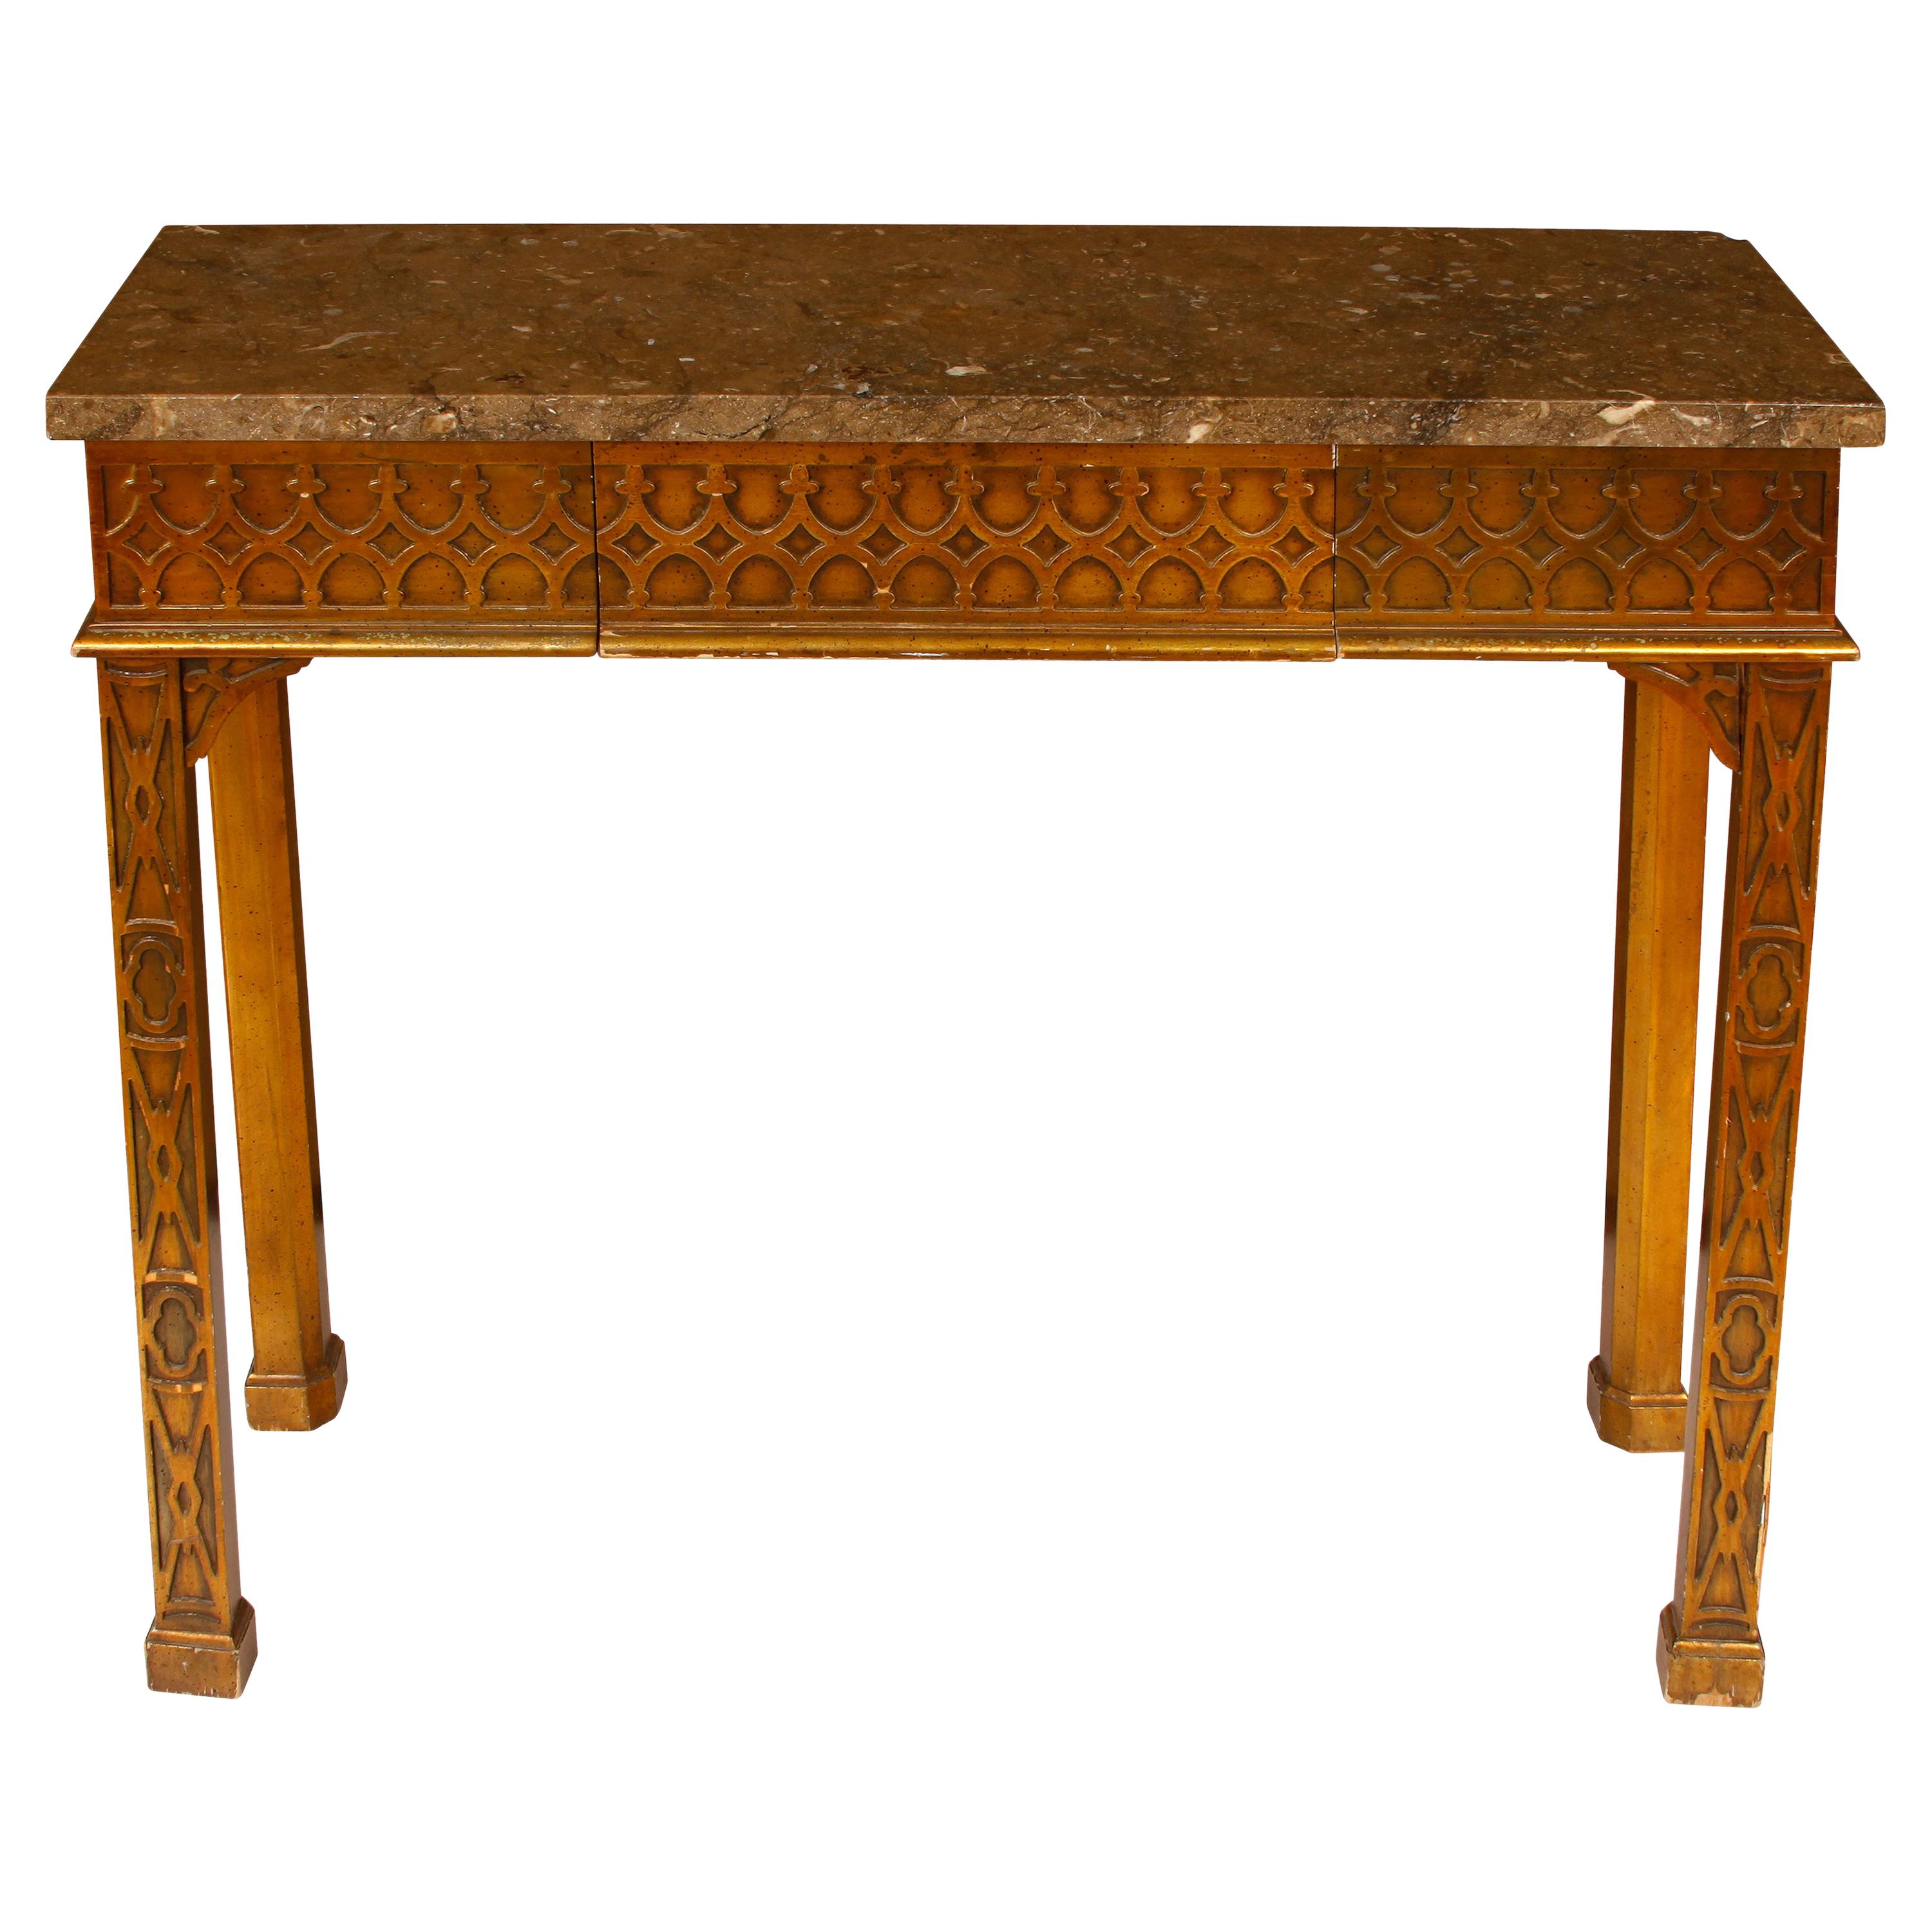 Gothic Stone Top Console with Drawer